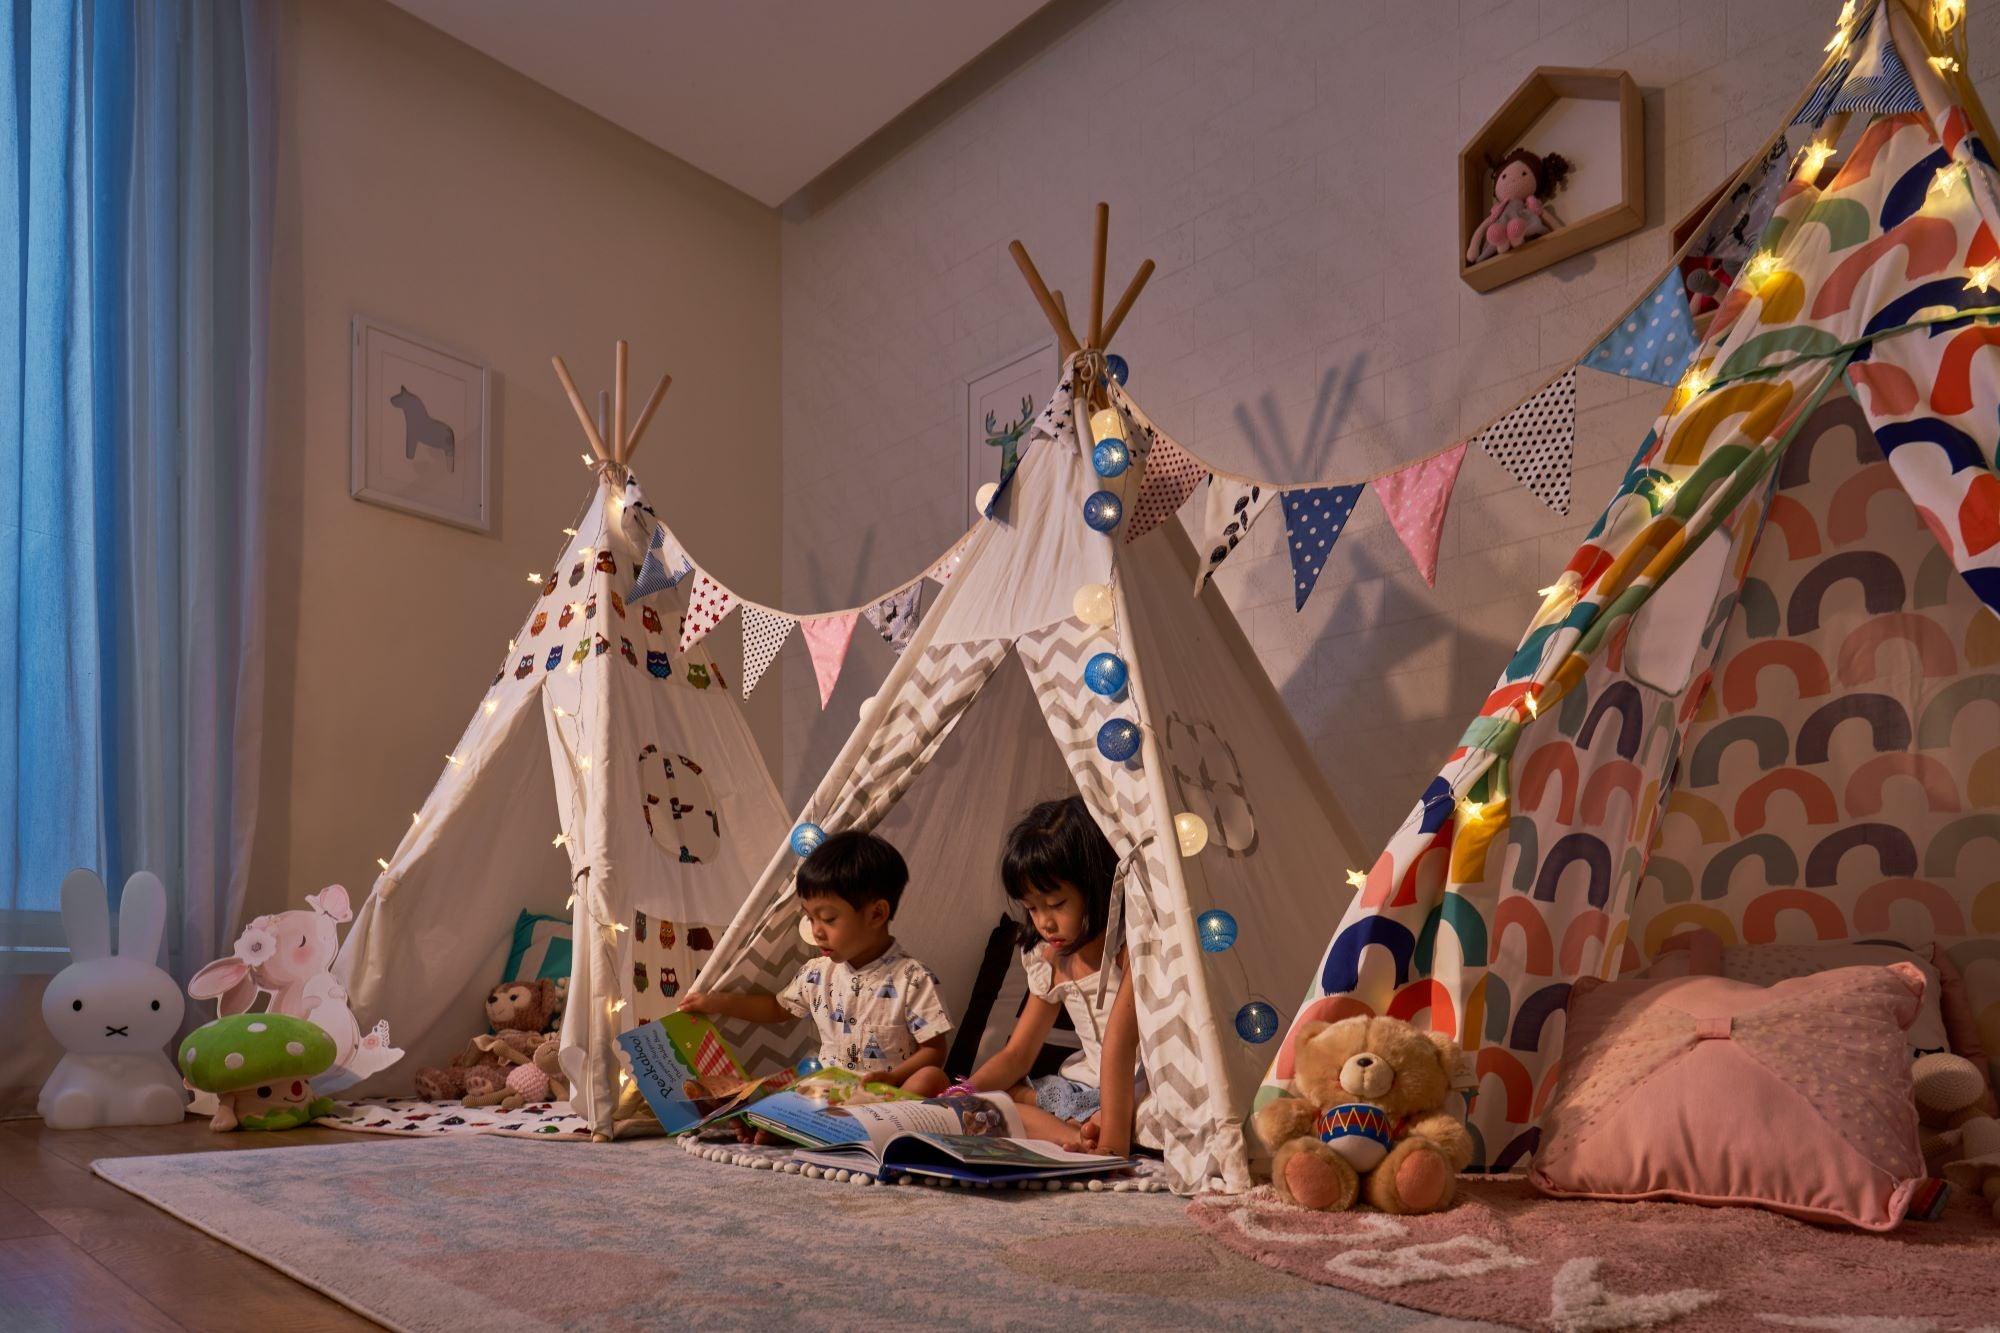 PETIT Little Stars Teepee Camper Only (mat sold separately) - Kids Haven